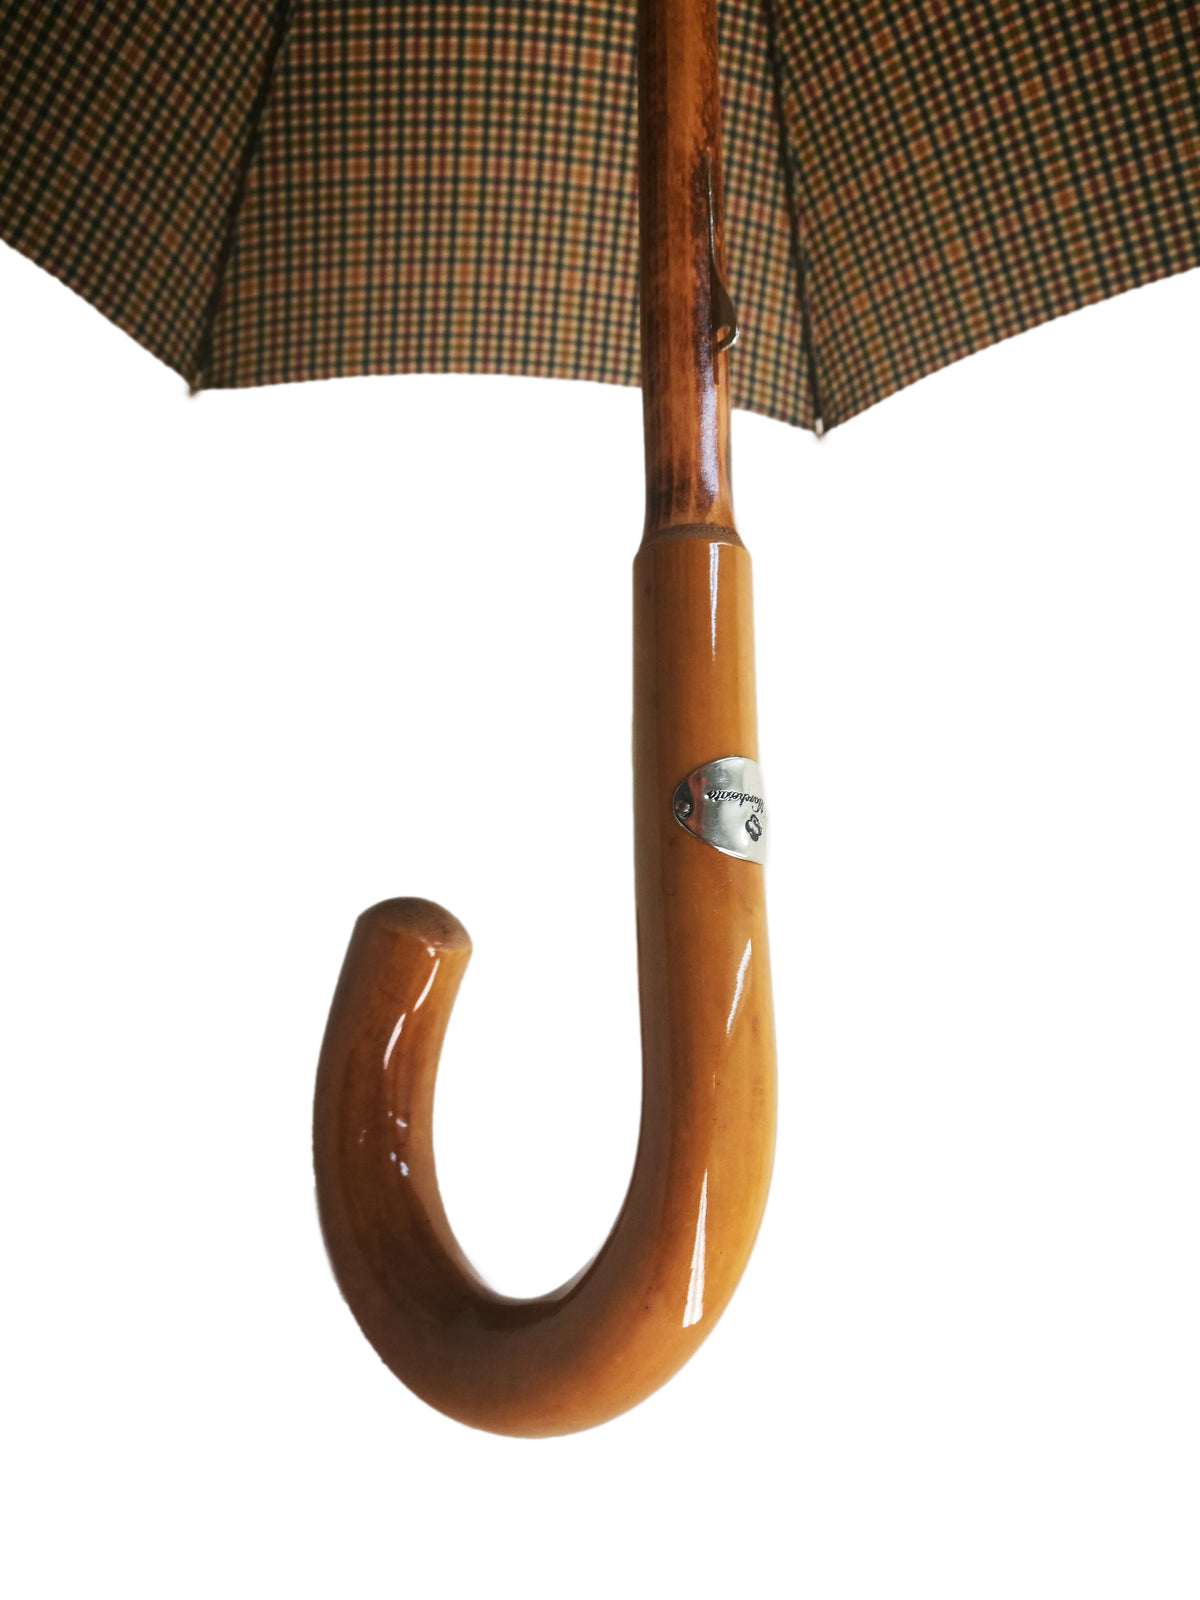 Cotton Check Umbrella with Malacca Root &amp; Beech Wood